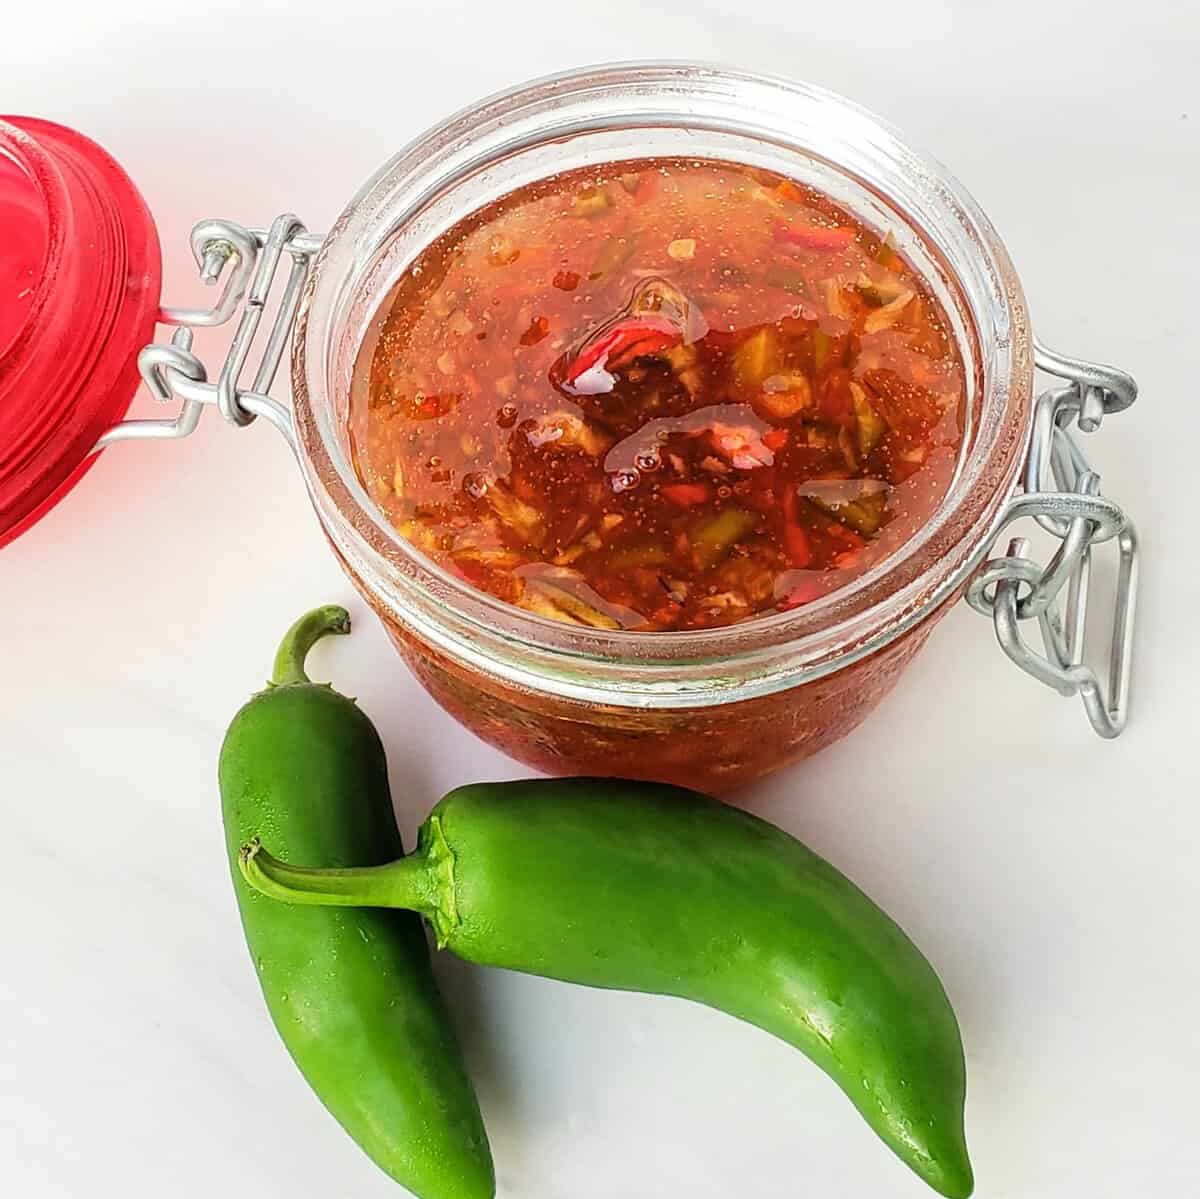 Hinged jar of red and green jalapeno pepper jelly open; two jalapenos on white surface